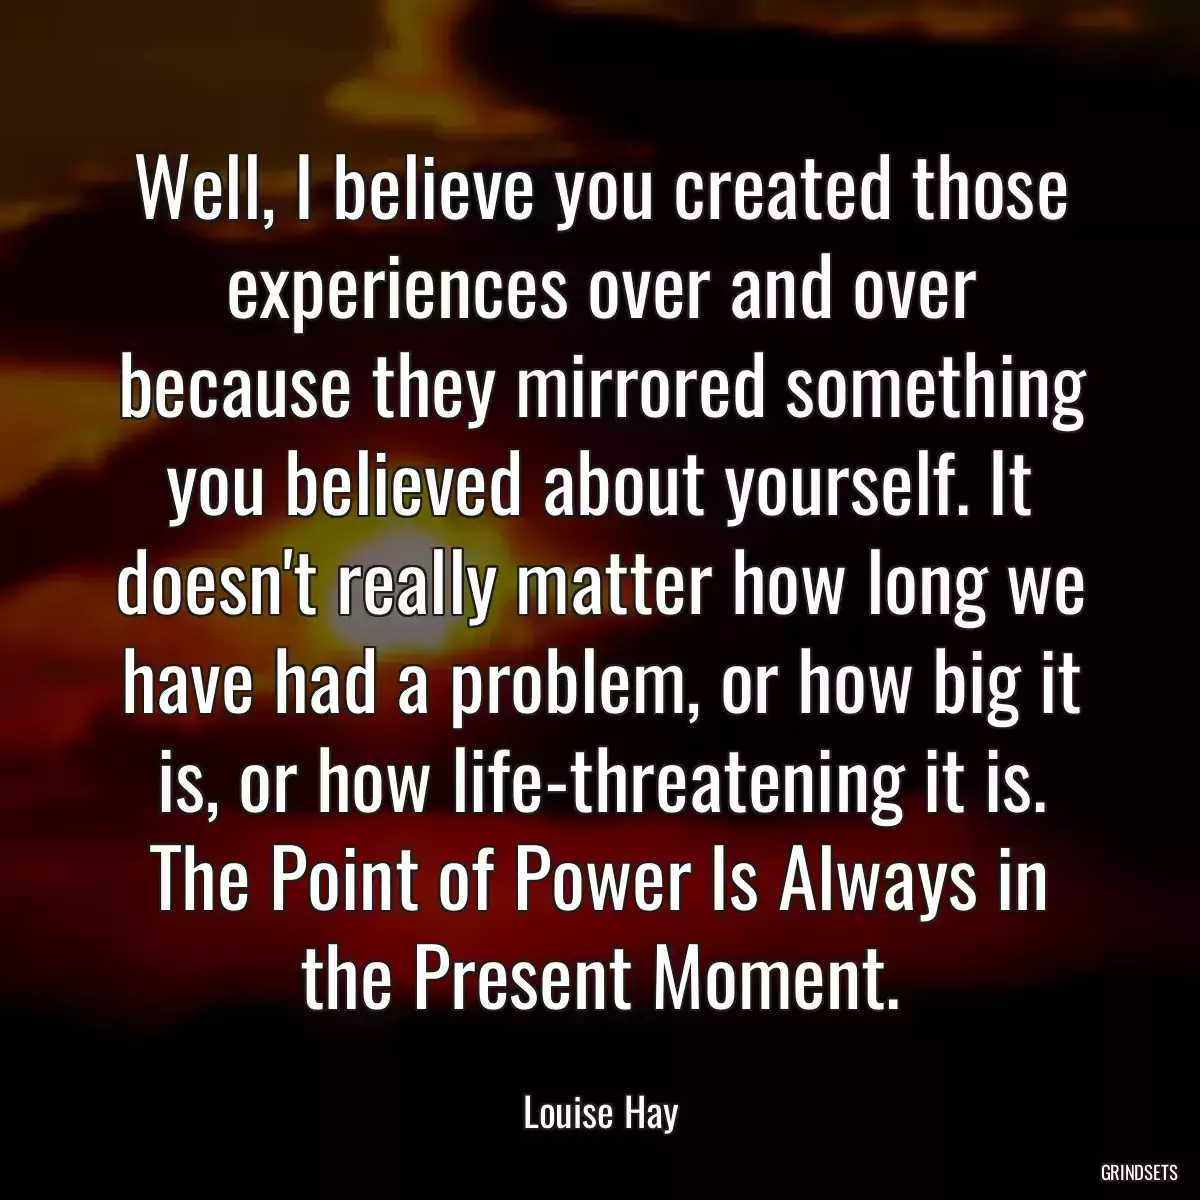 Well, I believe you created those experiences over and over because they mirrored something you believed about yourself. It doesn\'t really matter how long we have had a problem, or how big it is, or how life-threatening it is. The Point of Power Is Always in the Present Moment.